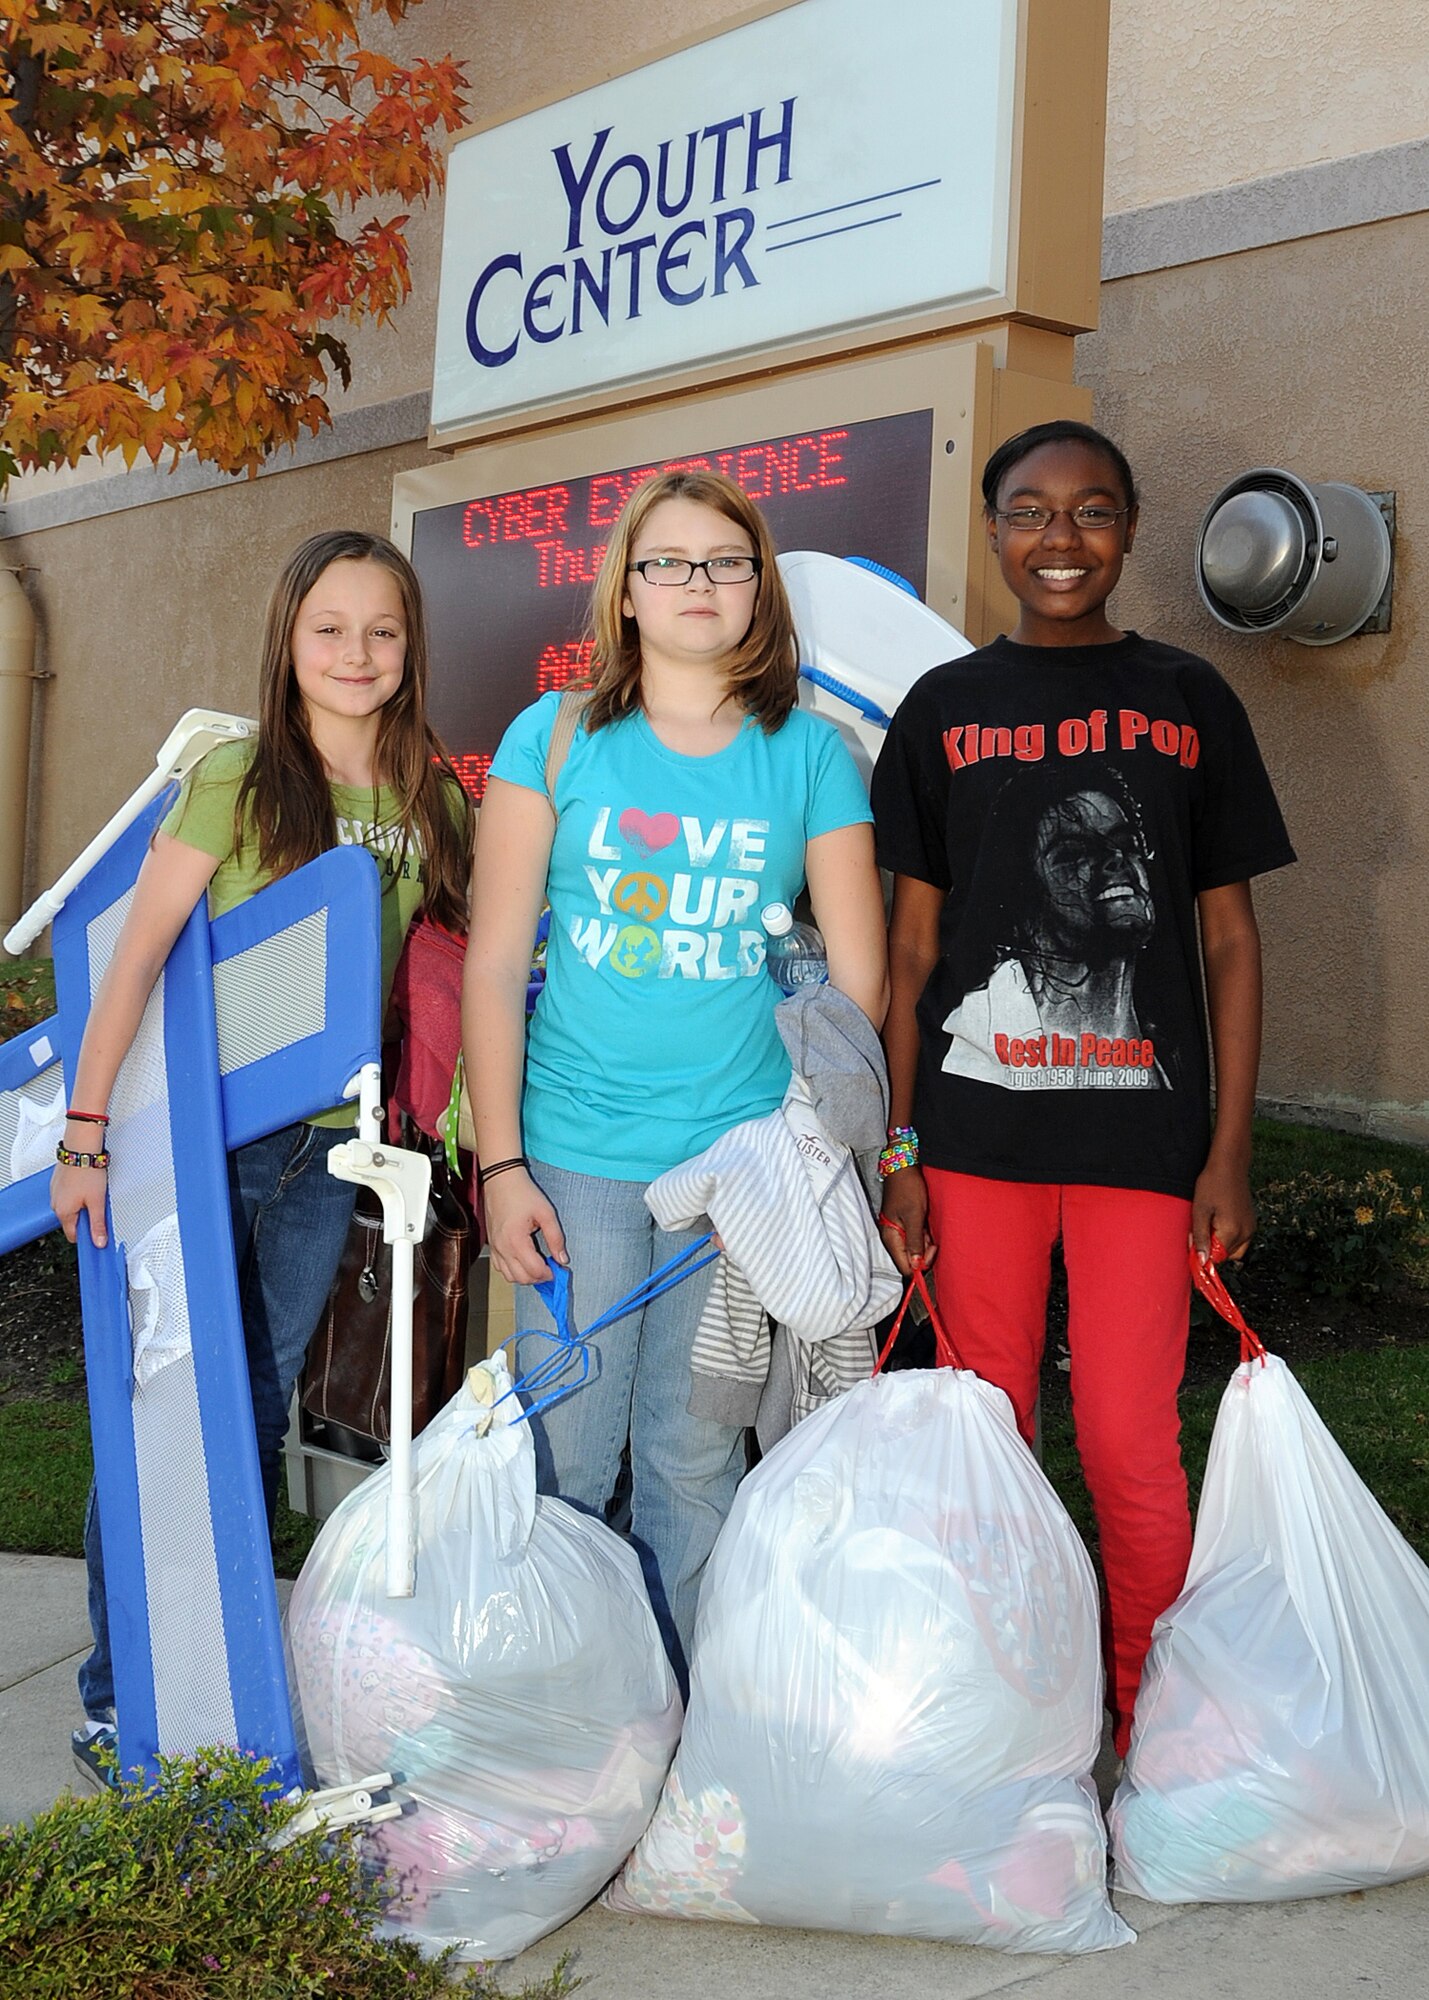 (left to right) Kattie Wesseling, Ashlee Reed and Maria Simmons are ready with bags of toys, clothing and other items to be delivered to the Union Rescue Mission, Los Angeles, to help those in need during this holiday season, Dec. 18.  The girls from the Los Angeles Air Force Base Youth Programs, along with YP leaders, delivered a van full of items collected through donations from the base’s Airman & Family Readiness Center, the Airmen’s Attic and several families on base. The event was part of YP’s Community Out Reach Program, which teaches youths the importance of humanity and caring for others. (Photo by Joe Juarez)